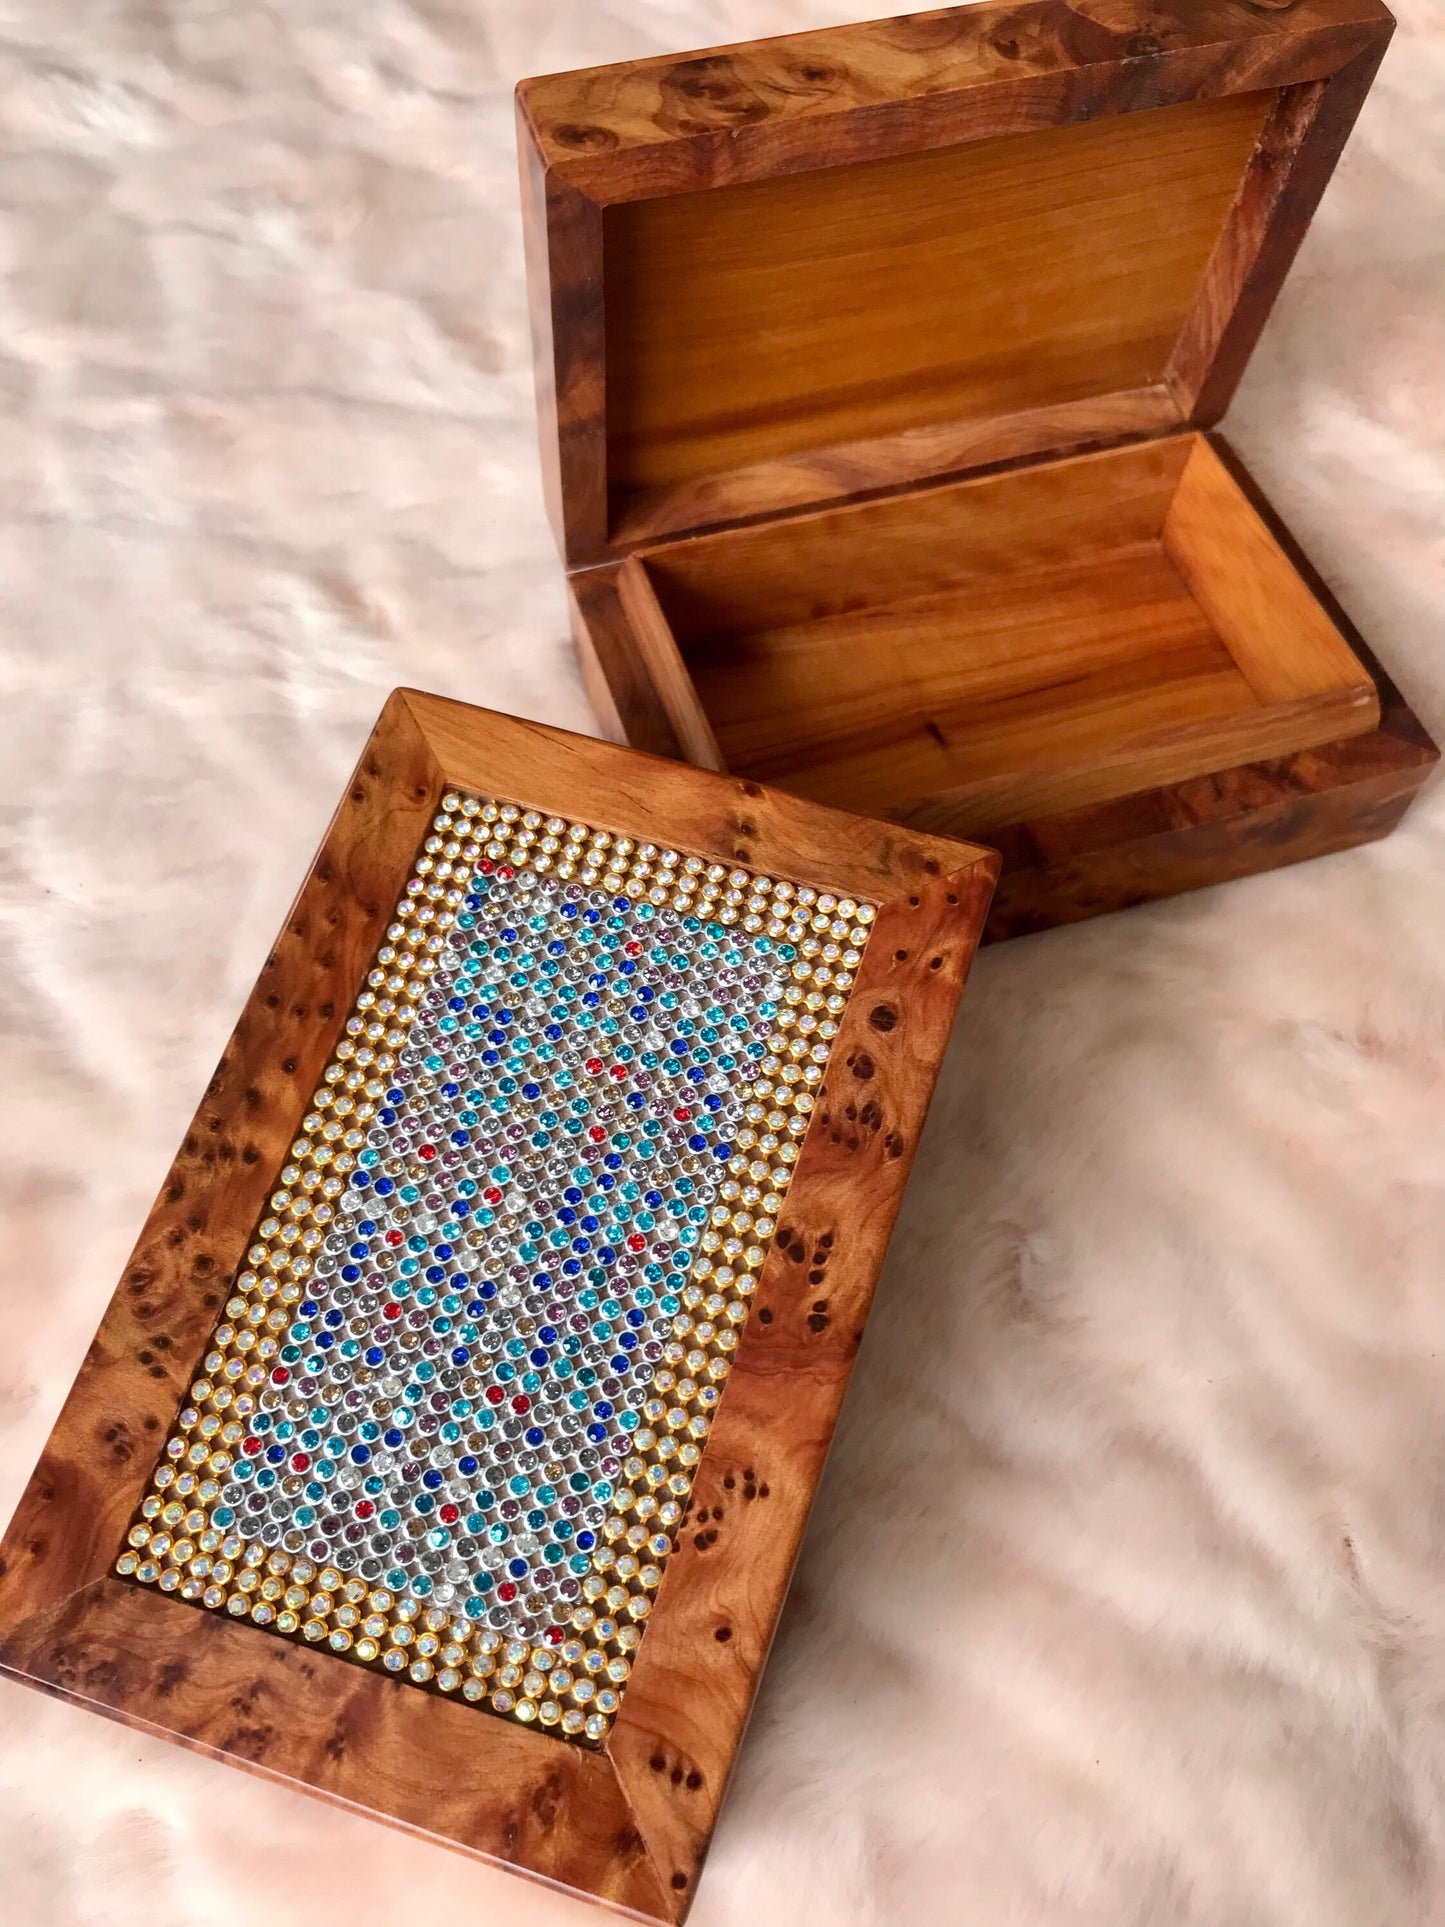 6"x4" jewellery Box for Women,Wedding,Anniversary Gift For Wife,girl,wooden box inlay chest with stones,couple's custom Box,emotional gift